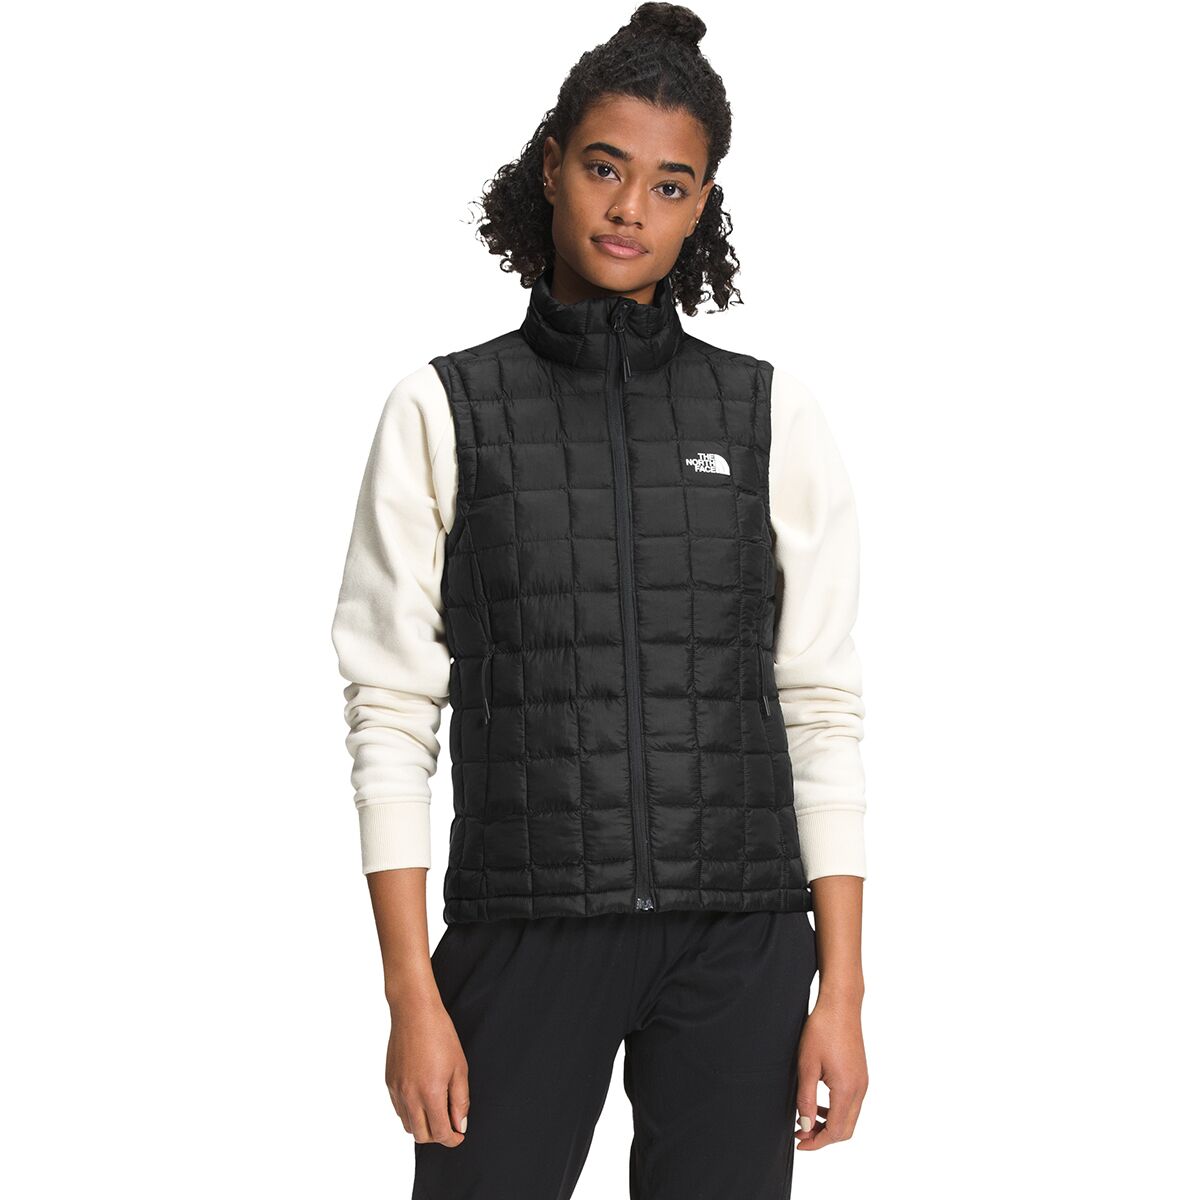 The North Face ThermoBall Eco Vest - Women's